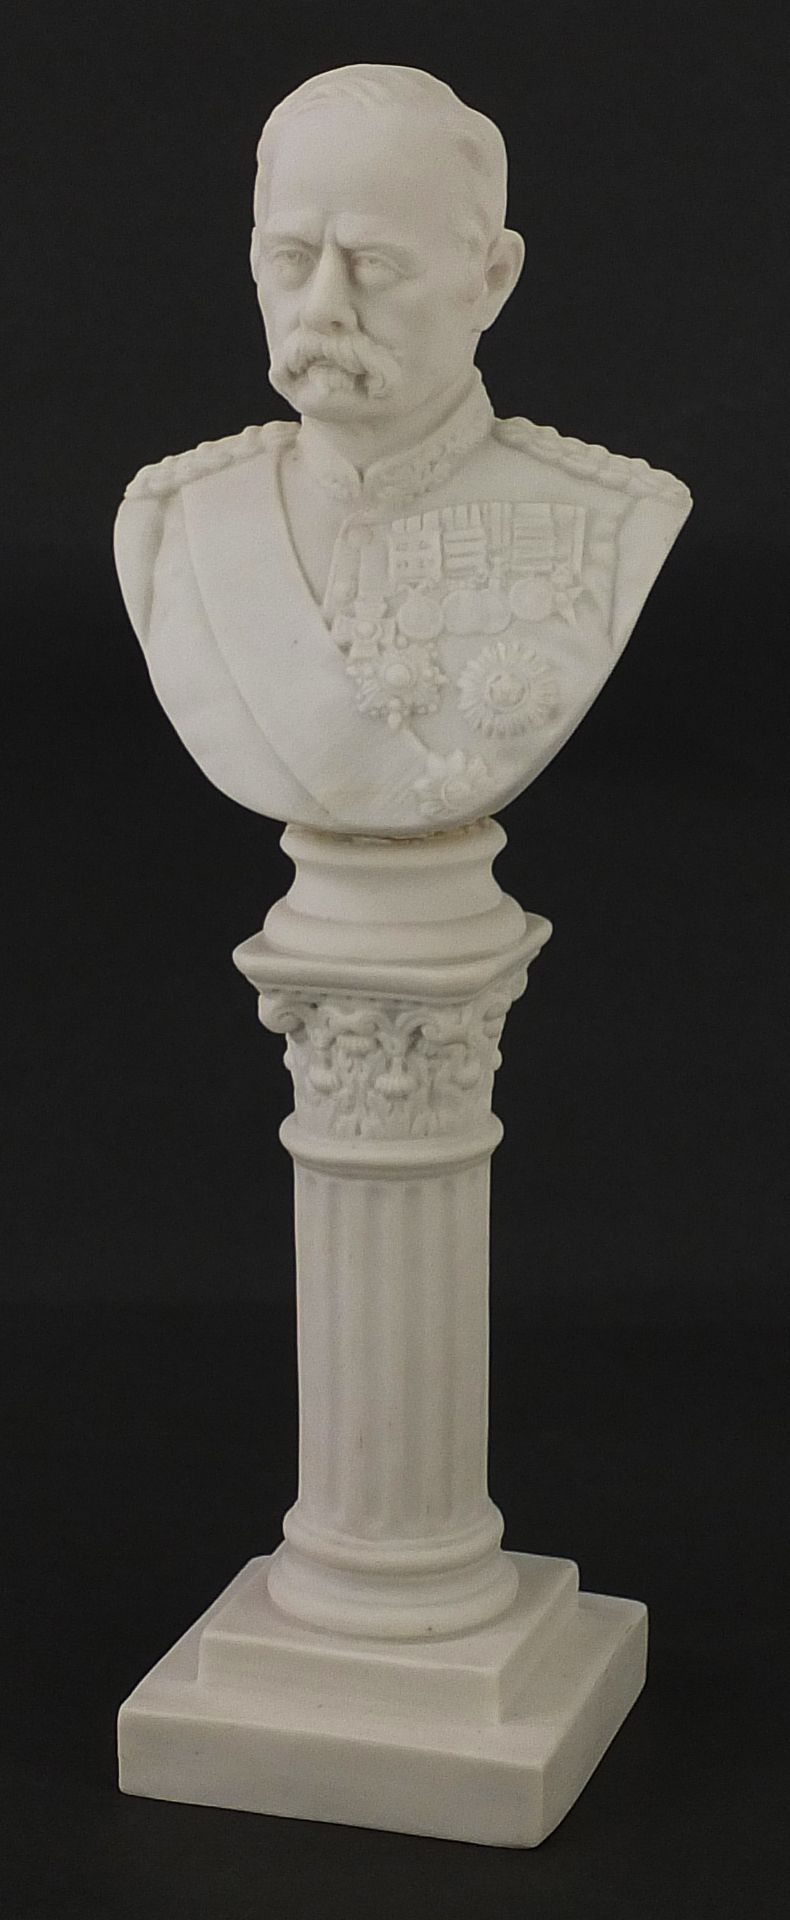 W C Lawton, Victorian parian ware bust of Lord Roberts VC dated January 1900, 26cm high